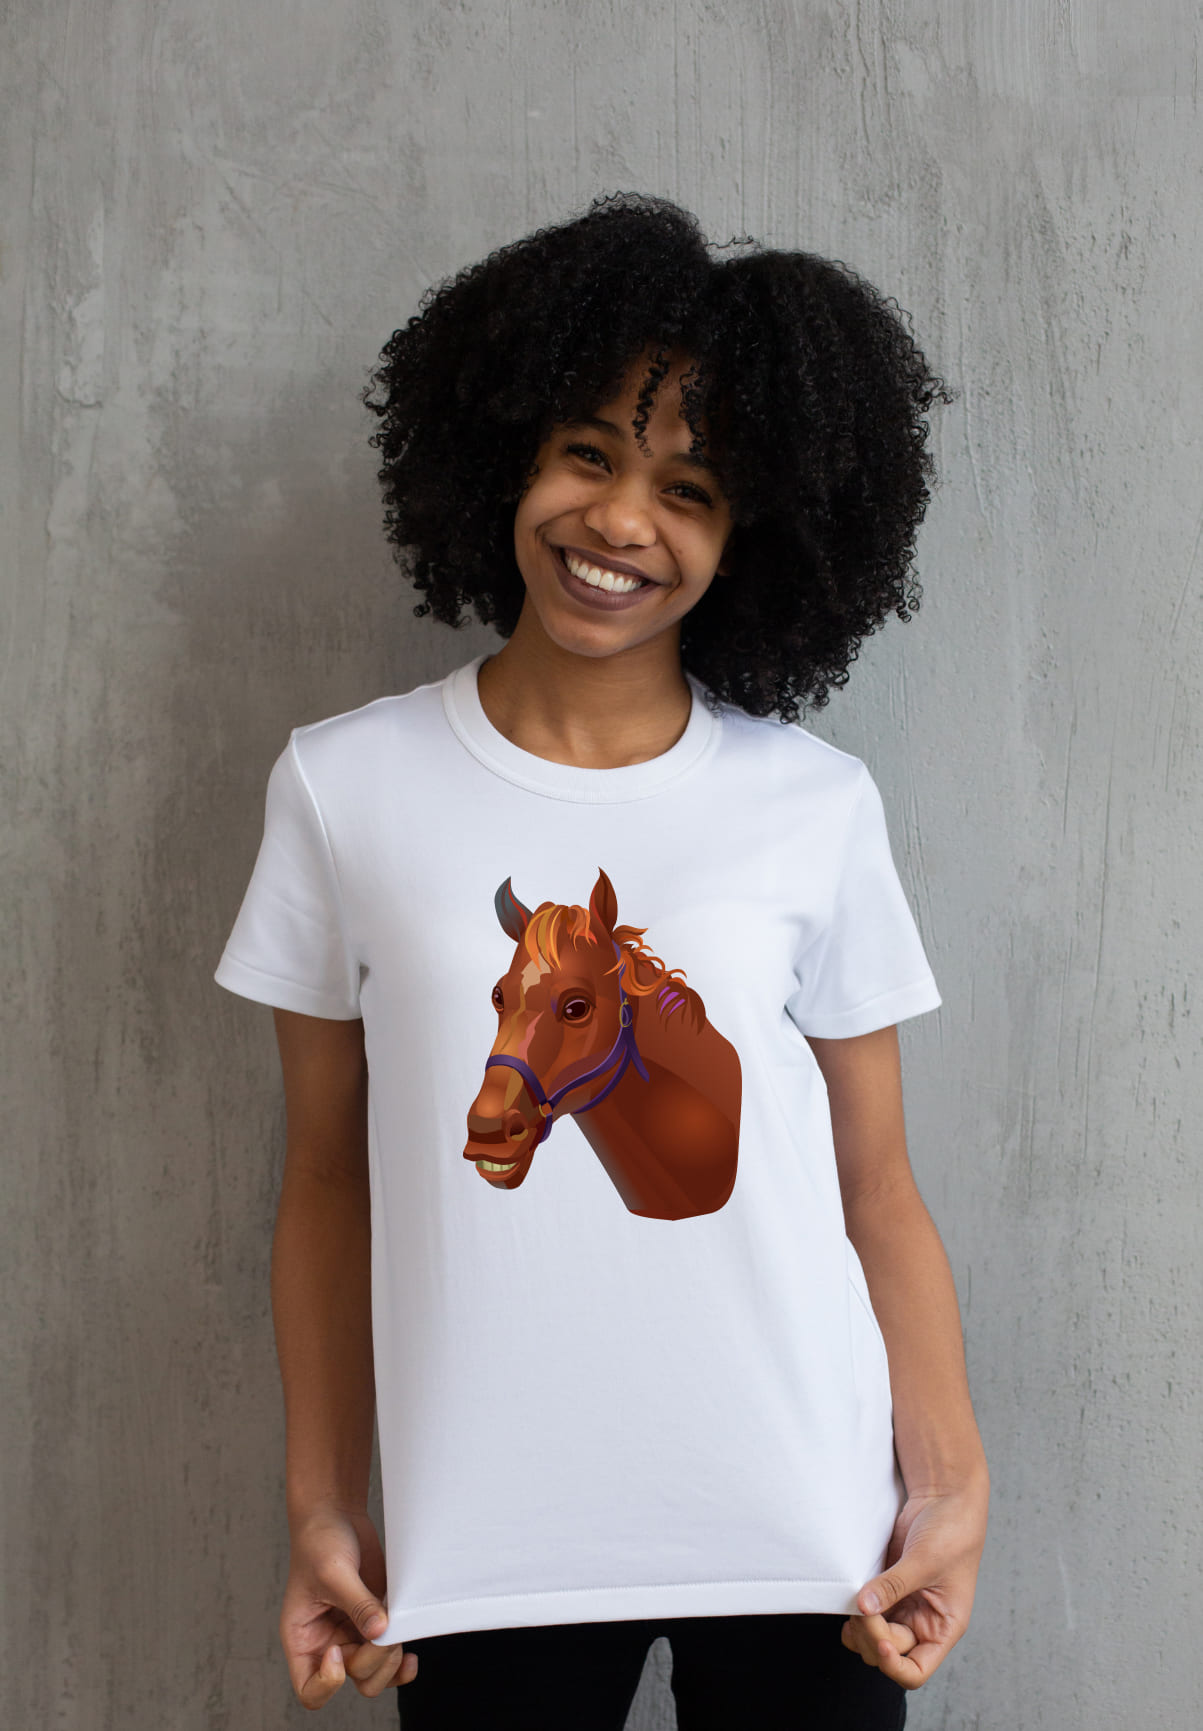 White t-shirt with a brown horse face on a girl.